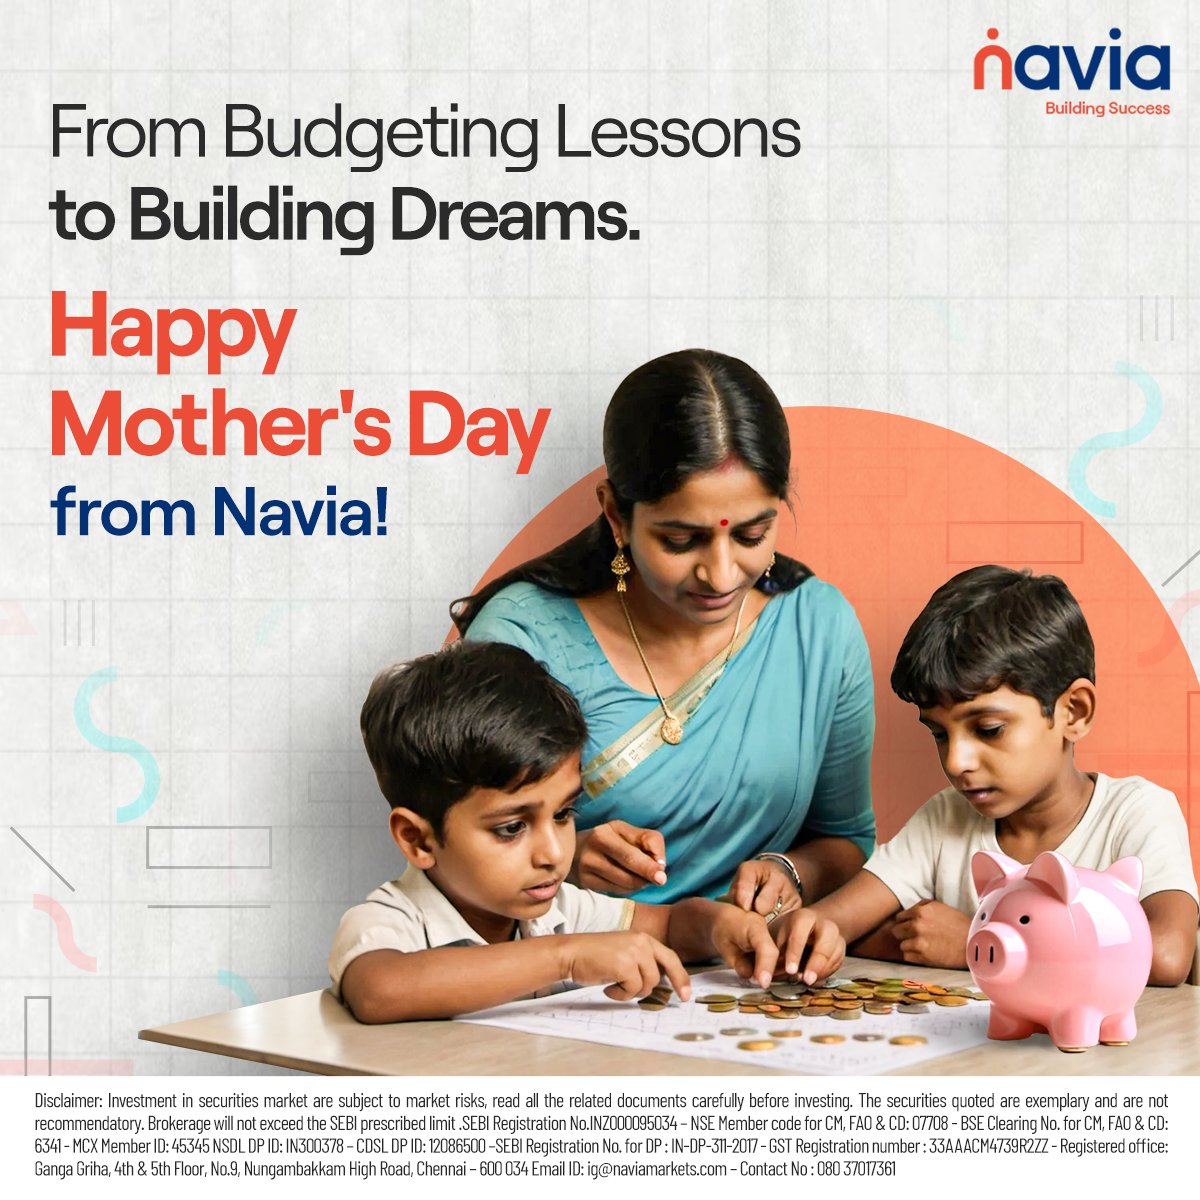 From teaching us to save every penny to cheering us on as we chase our biggest dreams, moms are our financial heroes and biggest supporters. Happy Mother's Day to all the incredible moms out there!

#Navia #TrustedTradingPartner #TradeSmart #FinancialFreedom #InvestingJourney…